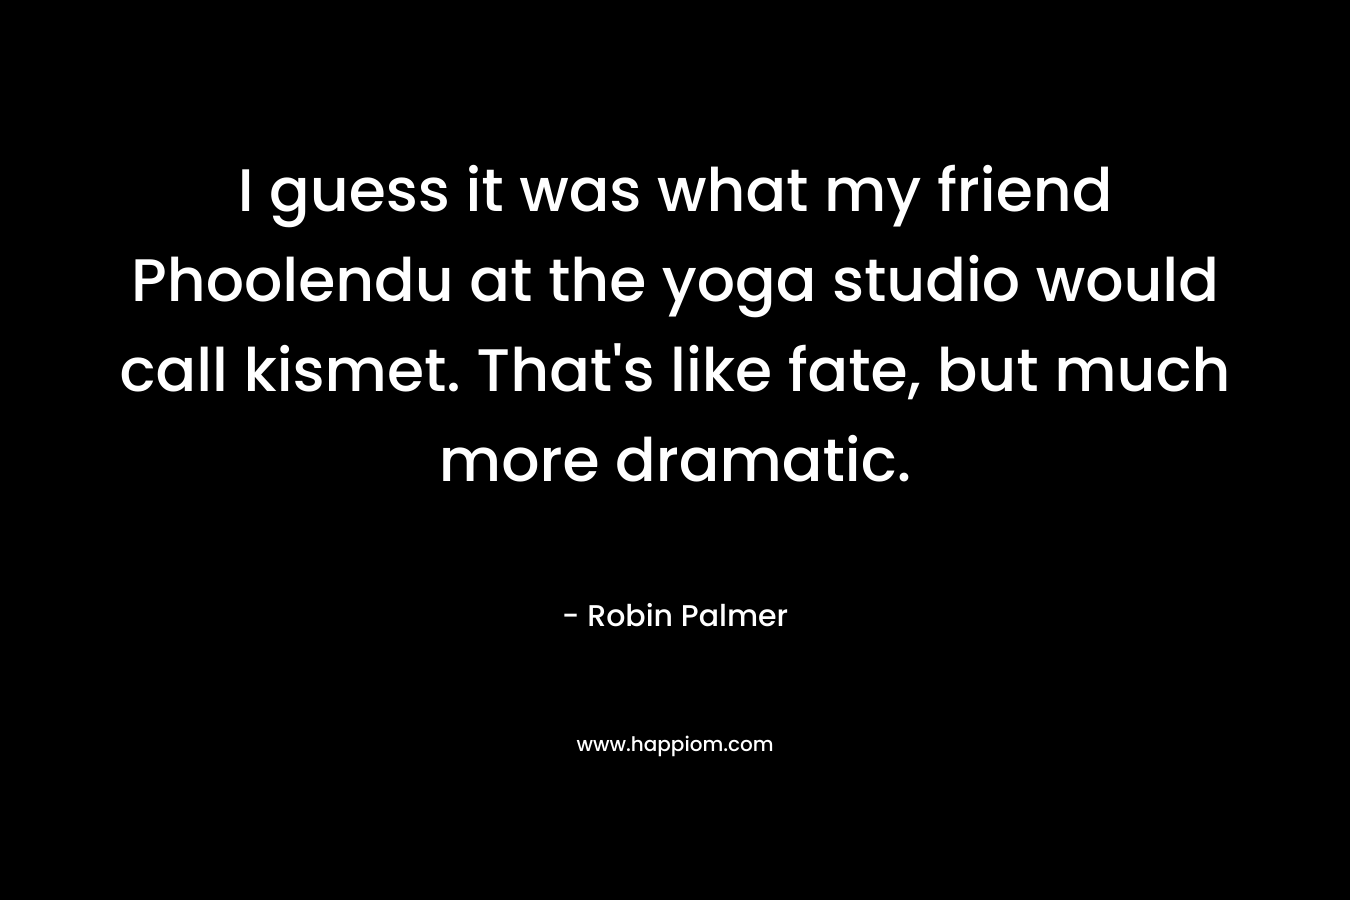 I guess it was what my friend Phoolendu at the yoga studio would call kismet. That's like fate, but much more dramatic.